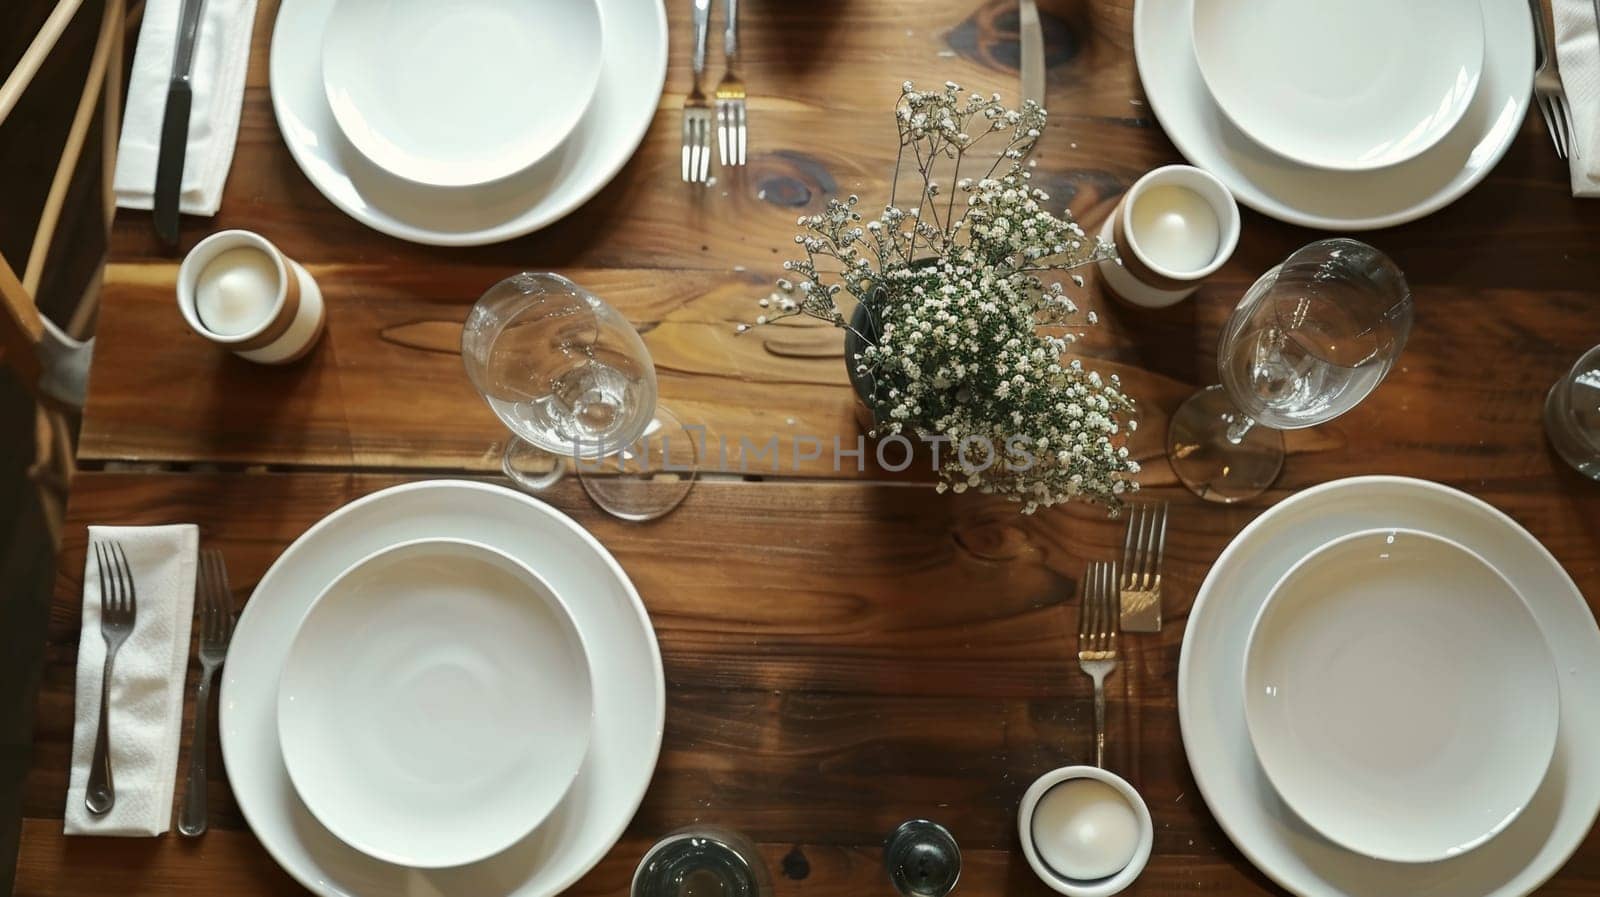 Elegant table setting featuring white plates and gypsophila centerpiece on a wooden table, perfect for intimate gatherings